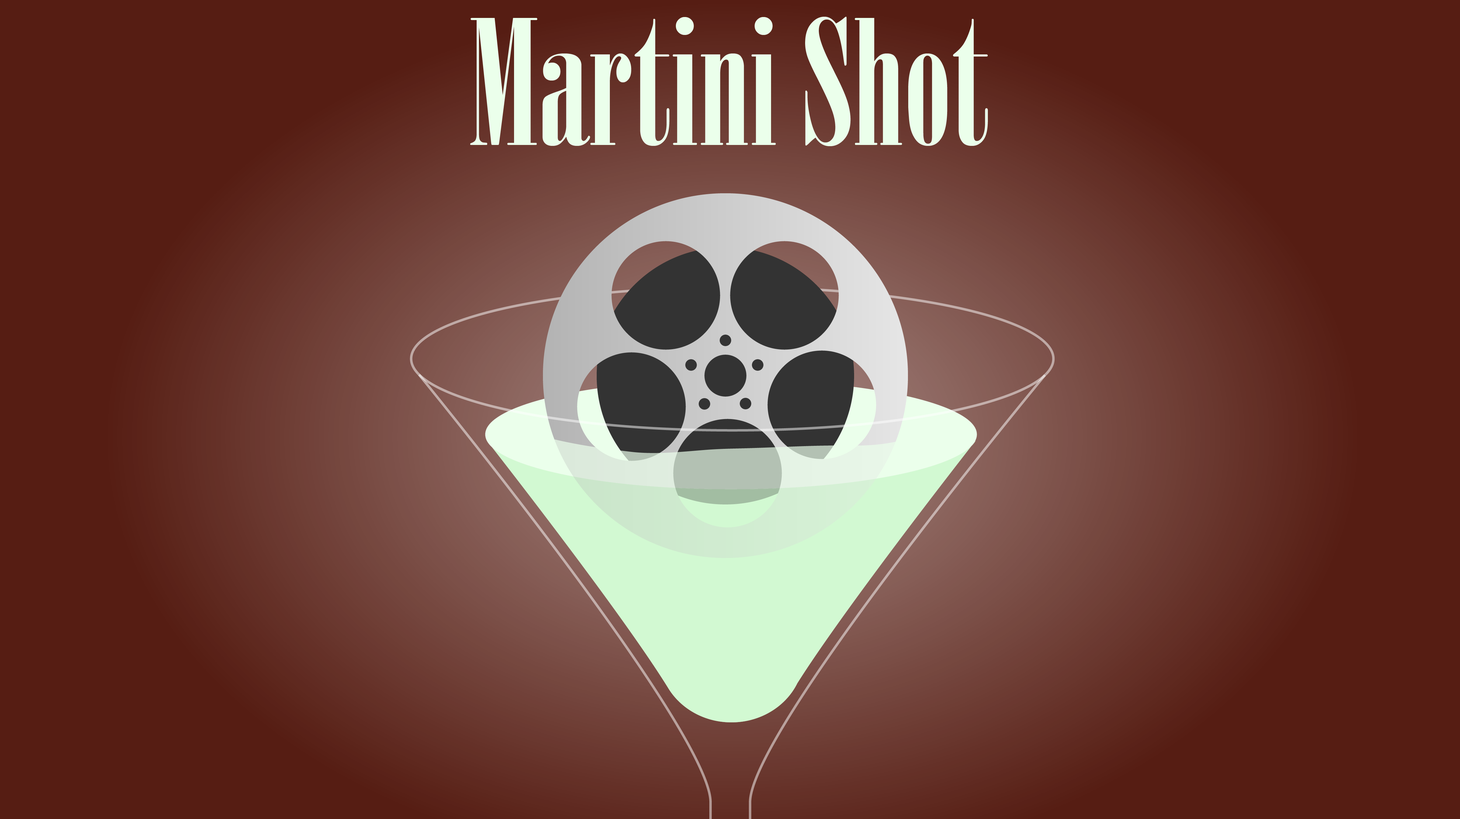 This is Rob Long and on today’s Martini Shot I realize that there are two kinds of people in the world. We’re all either R2D2 or C3P0 or Wile E Coyote or the Road Runner or Moses or Complaining Israelites or Jeffrey or Ina.